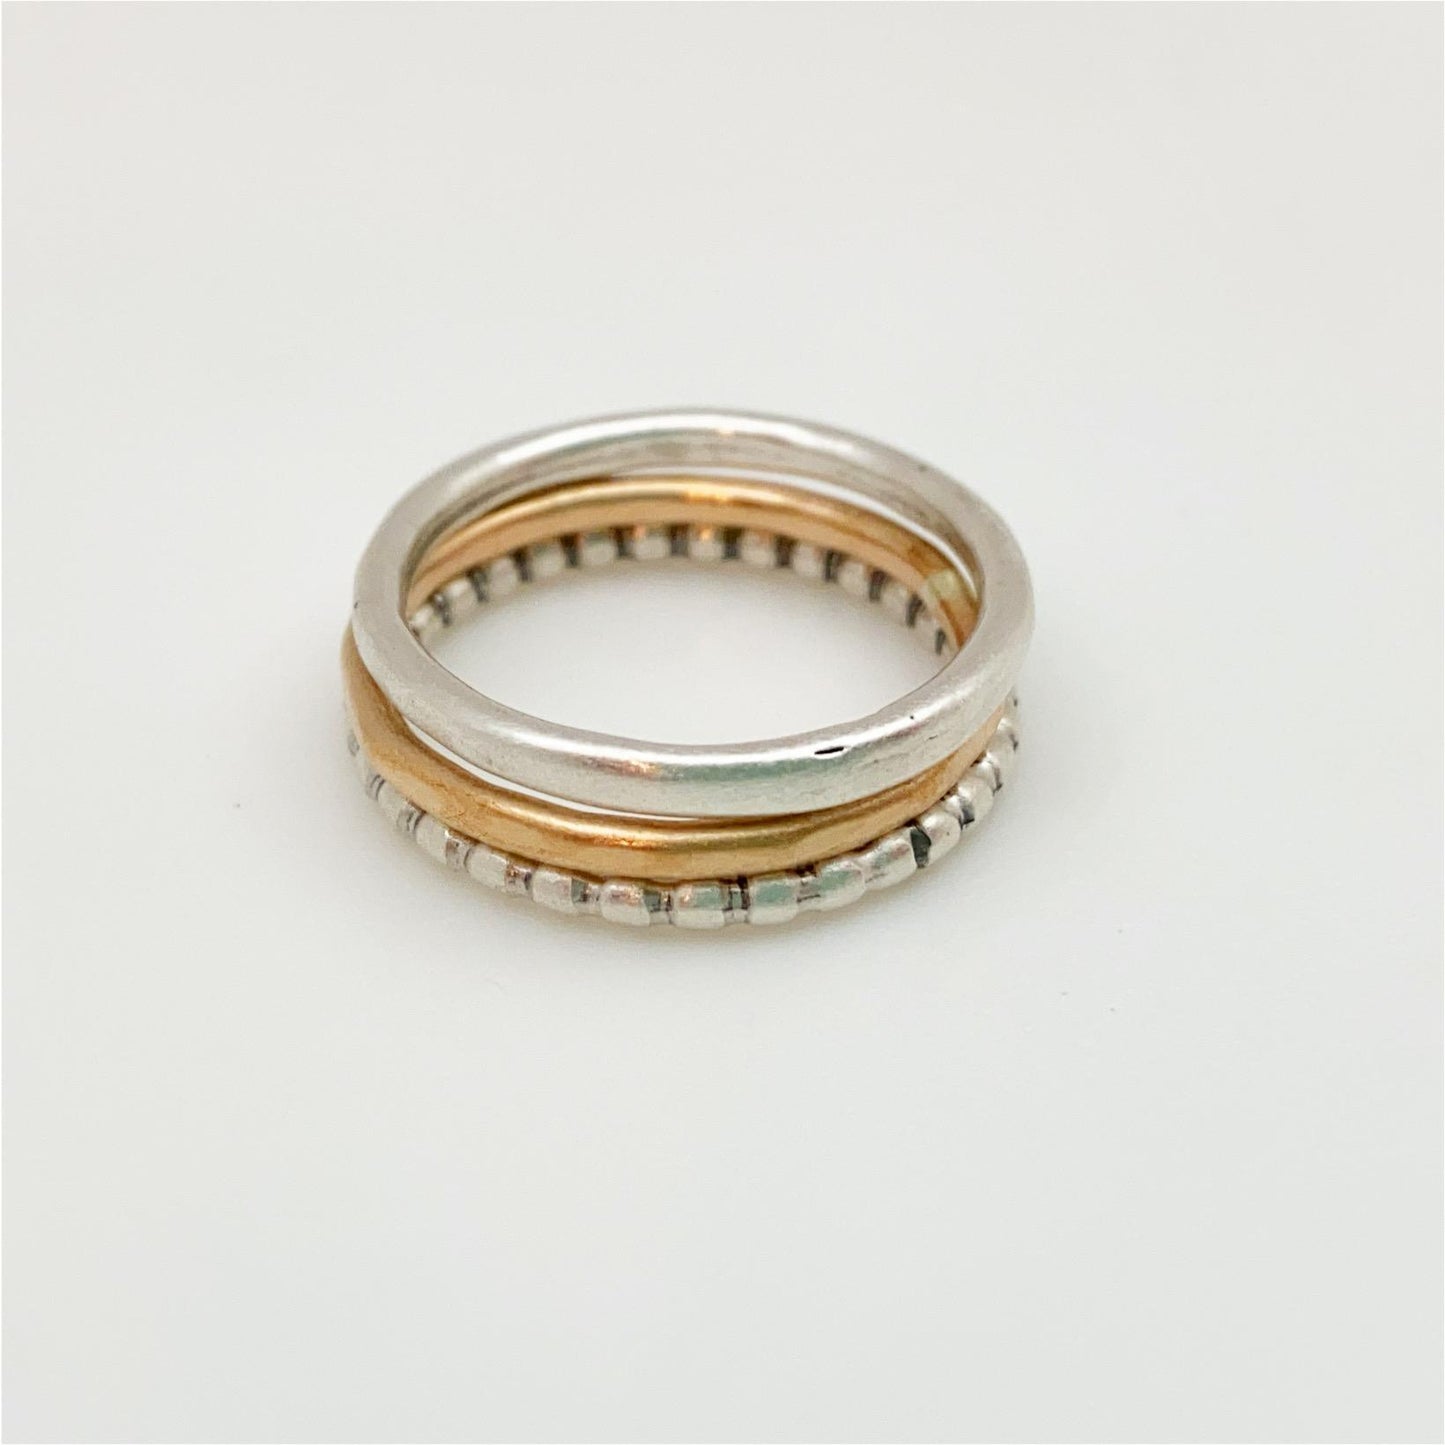 Ring Set - 3 Stacking - Gold Fill & Sterling